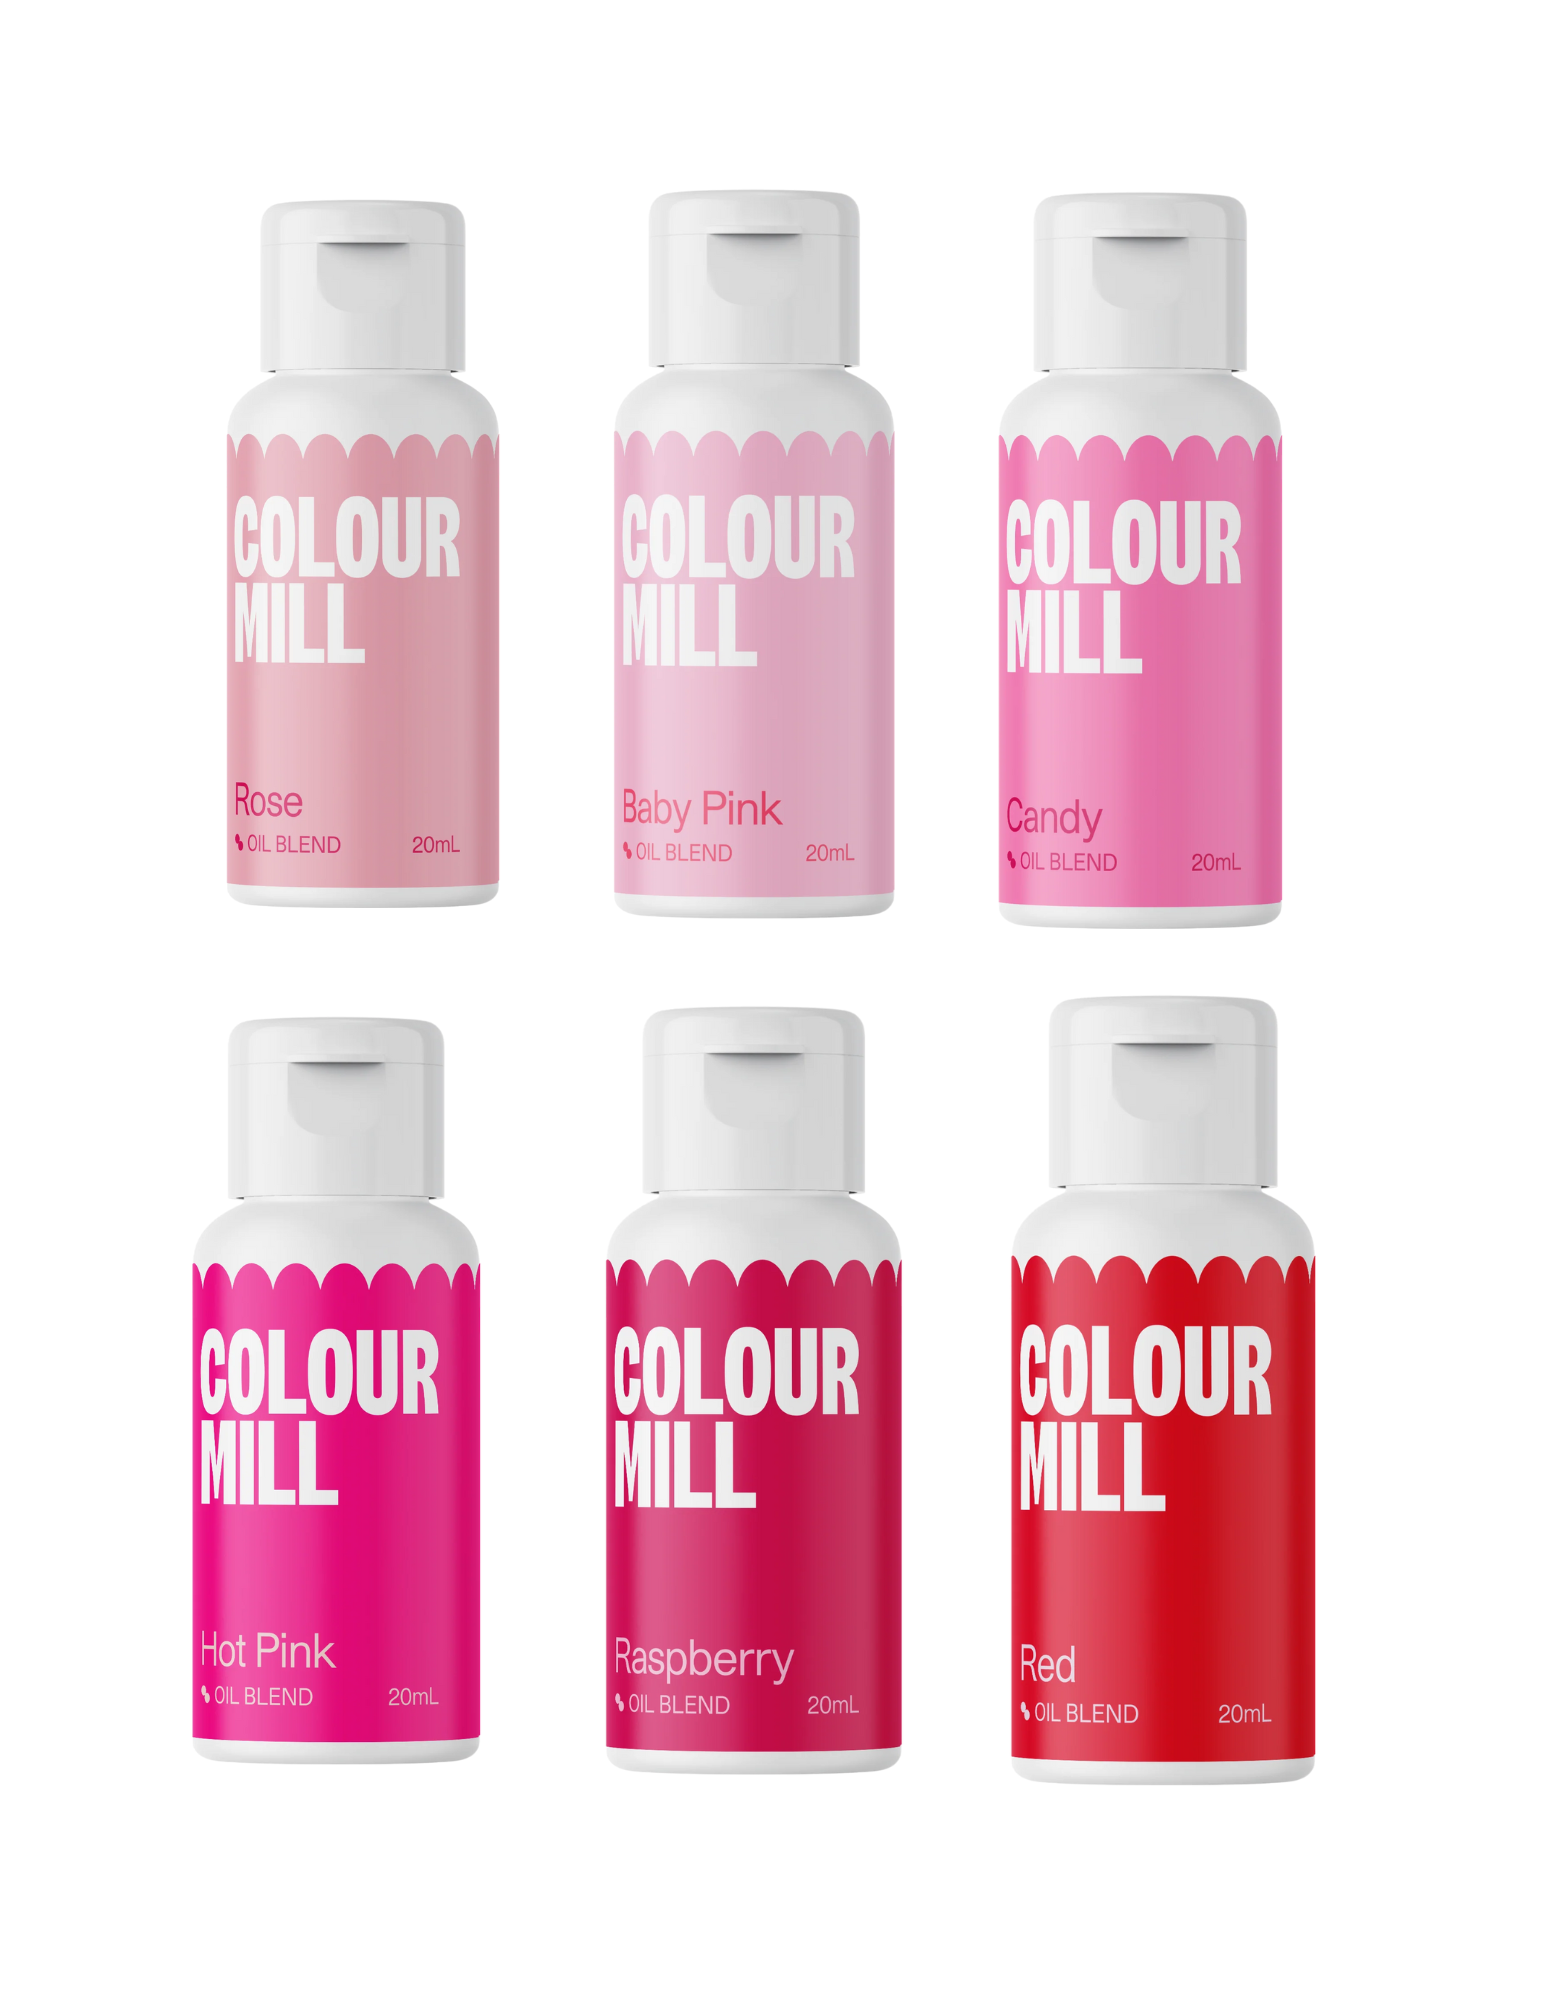  Colour Mill Oil-Based Food Coloring, 20 Milliliters Baby Pink  : Grocery & Gourmet Food